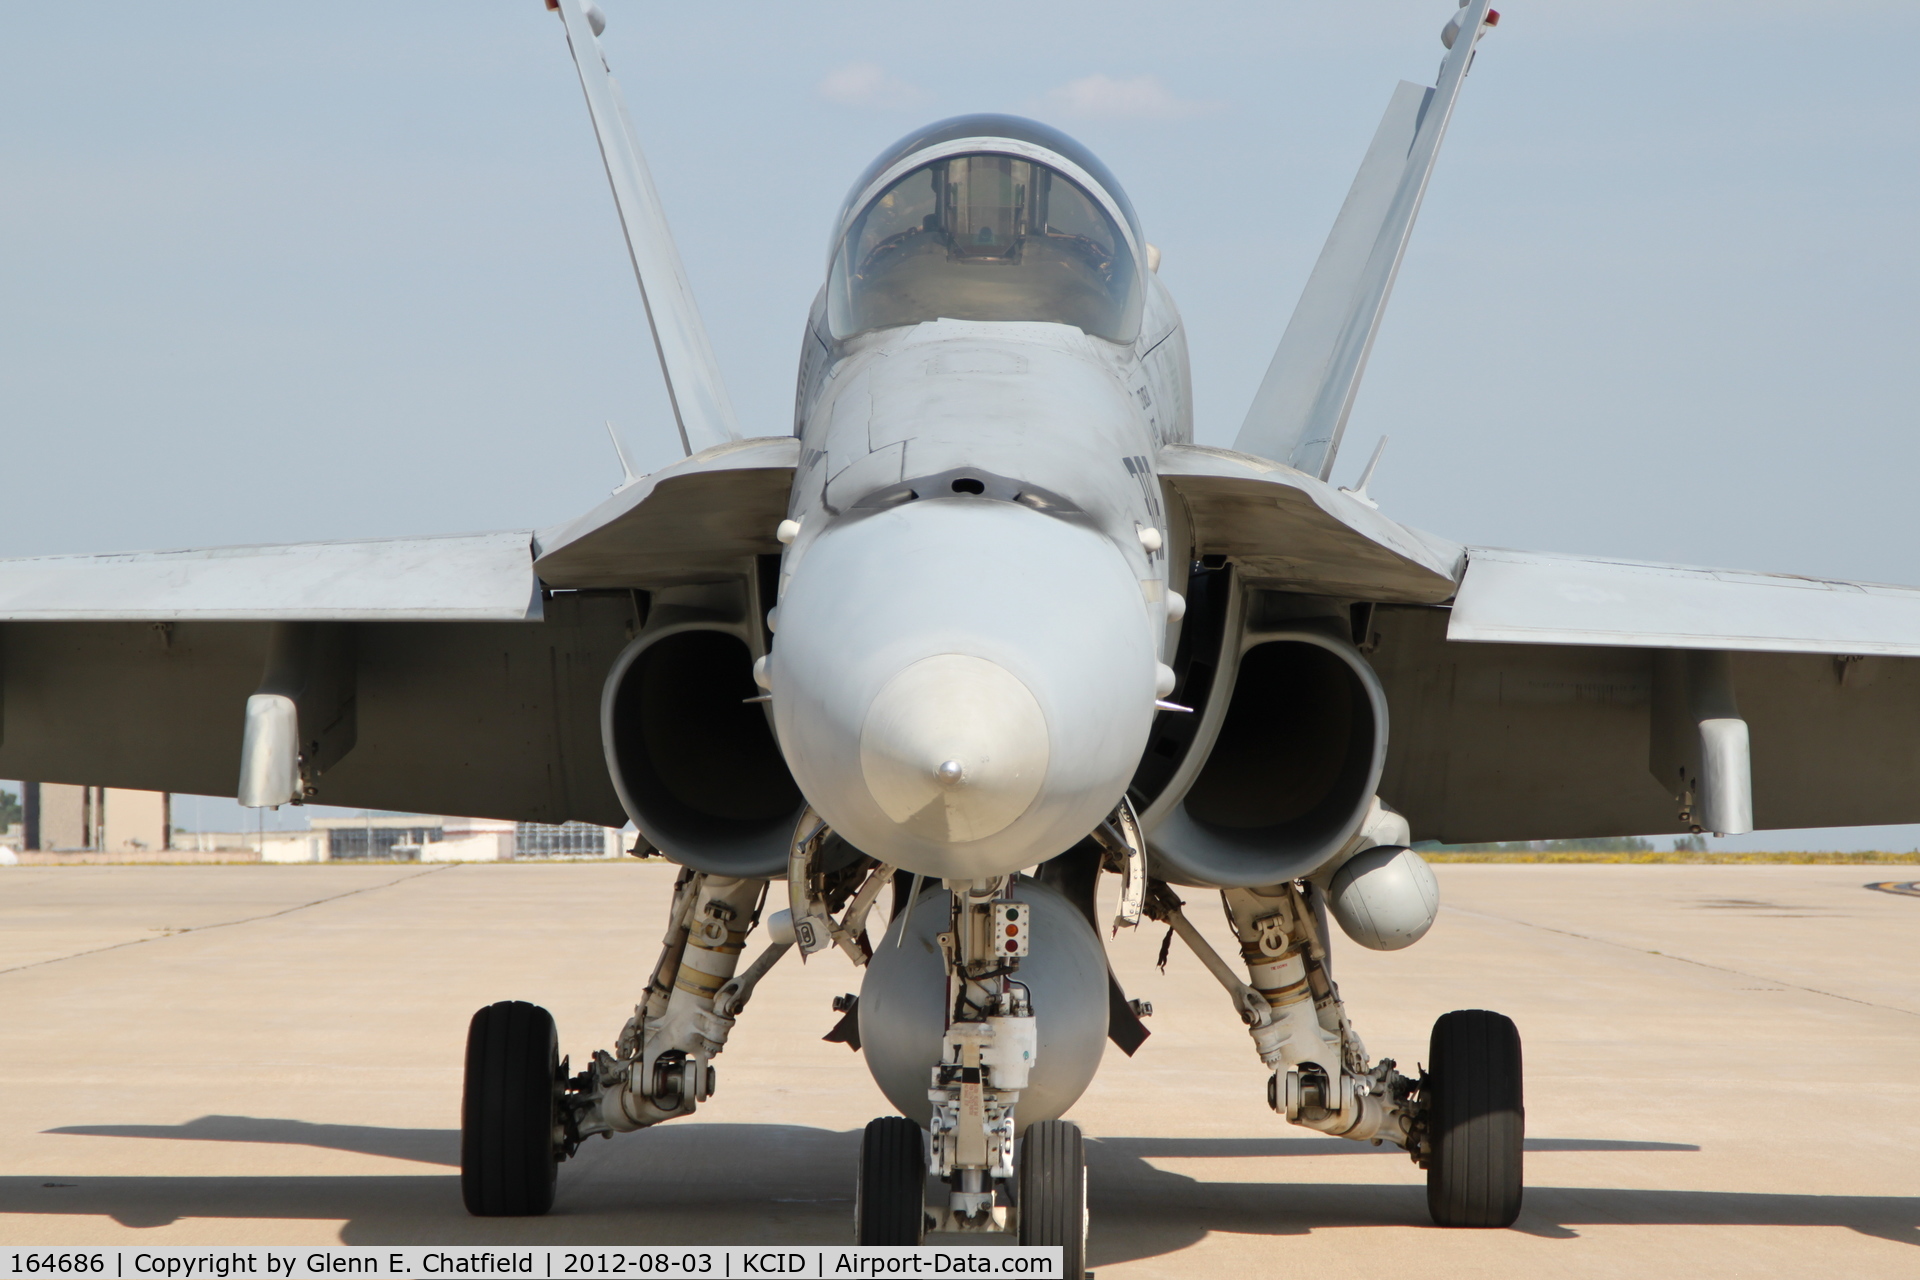 164686, McDonnell Douglas F/A-18C Hornet C/N 1119/C298, Stopping for fuel